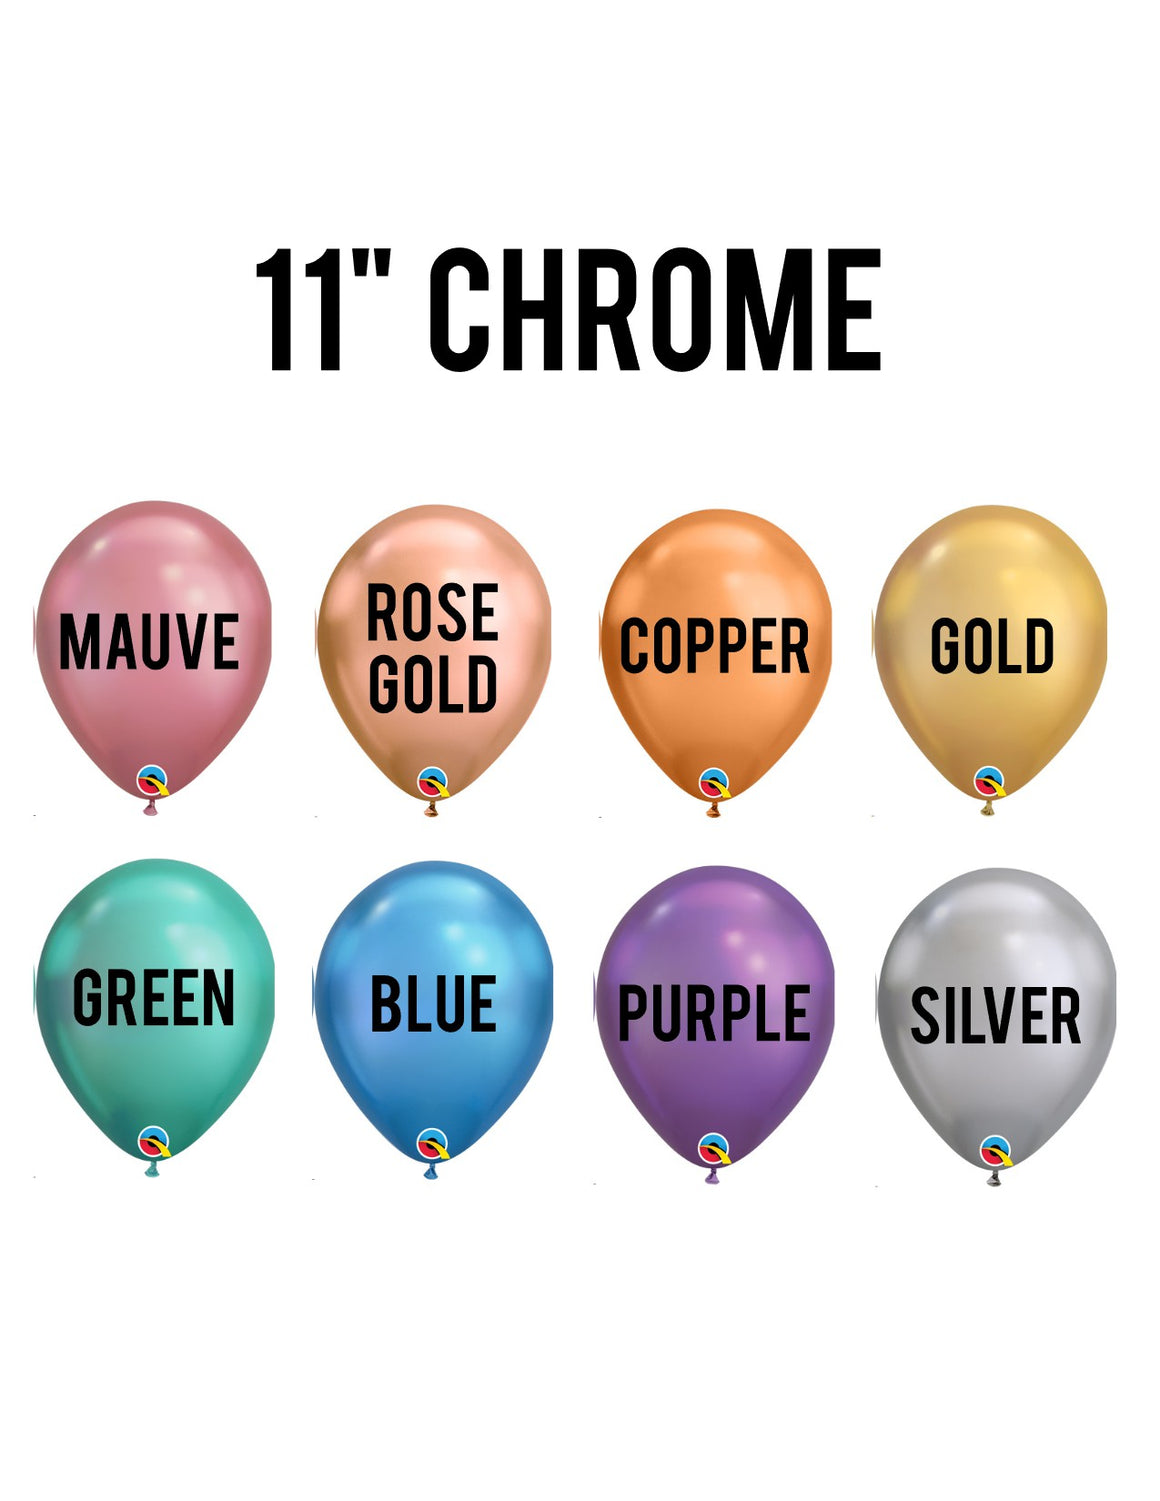 A color chart of all the chrome 11 inch balloons offered is shown in order of mauve, rose gold, copper, gold, green, blue, purple, and silver. Each balloon is inflated with the words on them showing their color.